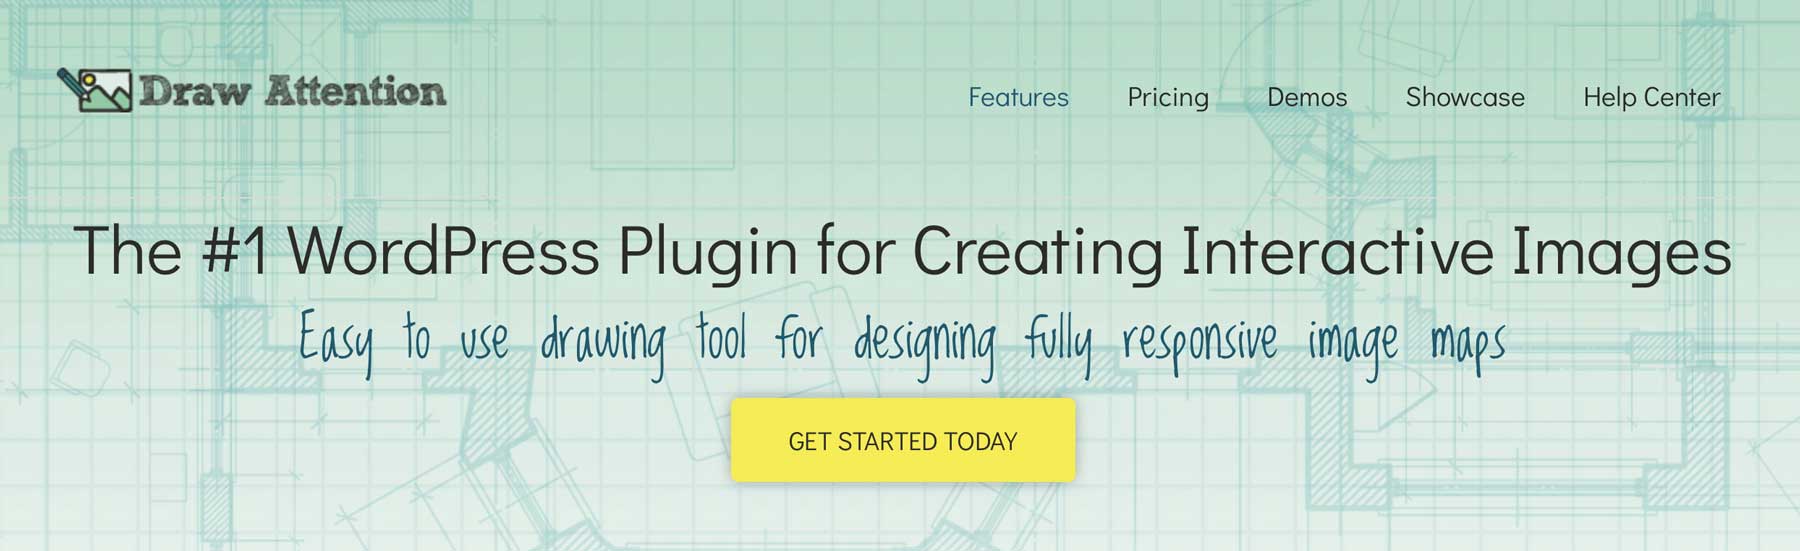 the Draw Attention plugin